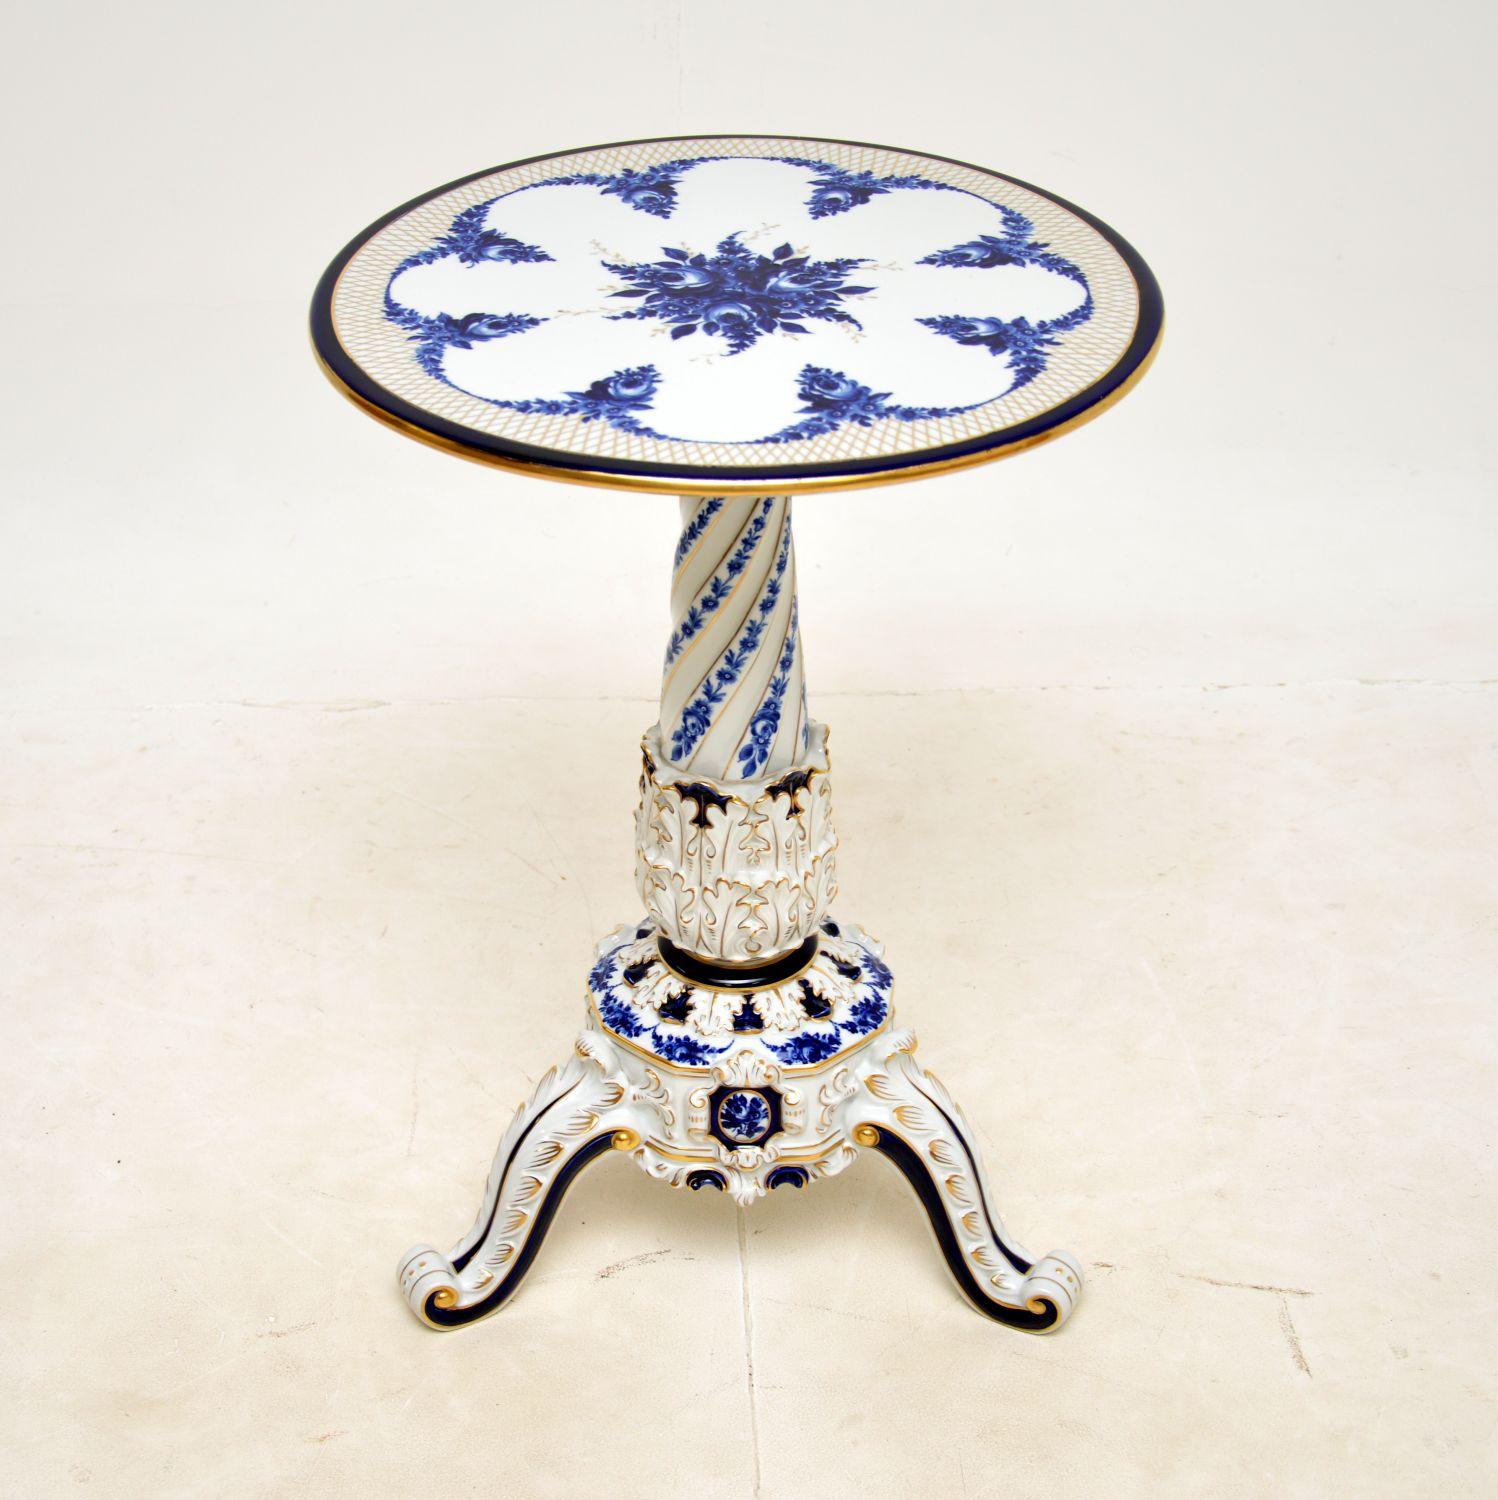 A stunning vintage German porcelain tripod table. This was made in Germany by Von Schierholz, it dates from around the 1960s.

The quality is outstanding, this is beautifully made, with amazing details throughout. The hand painted blue and gold